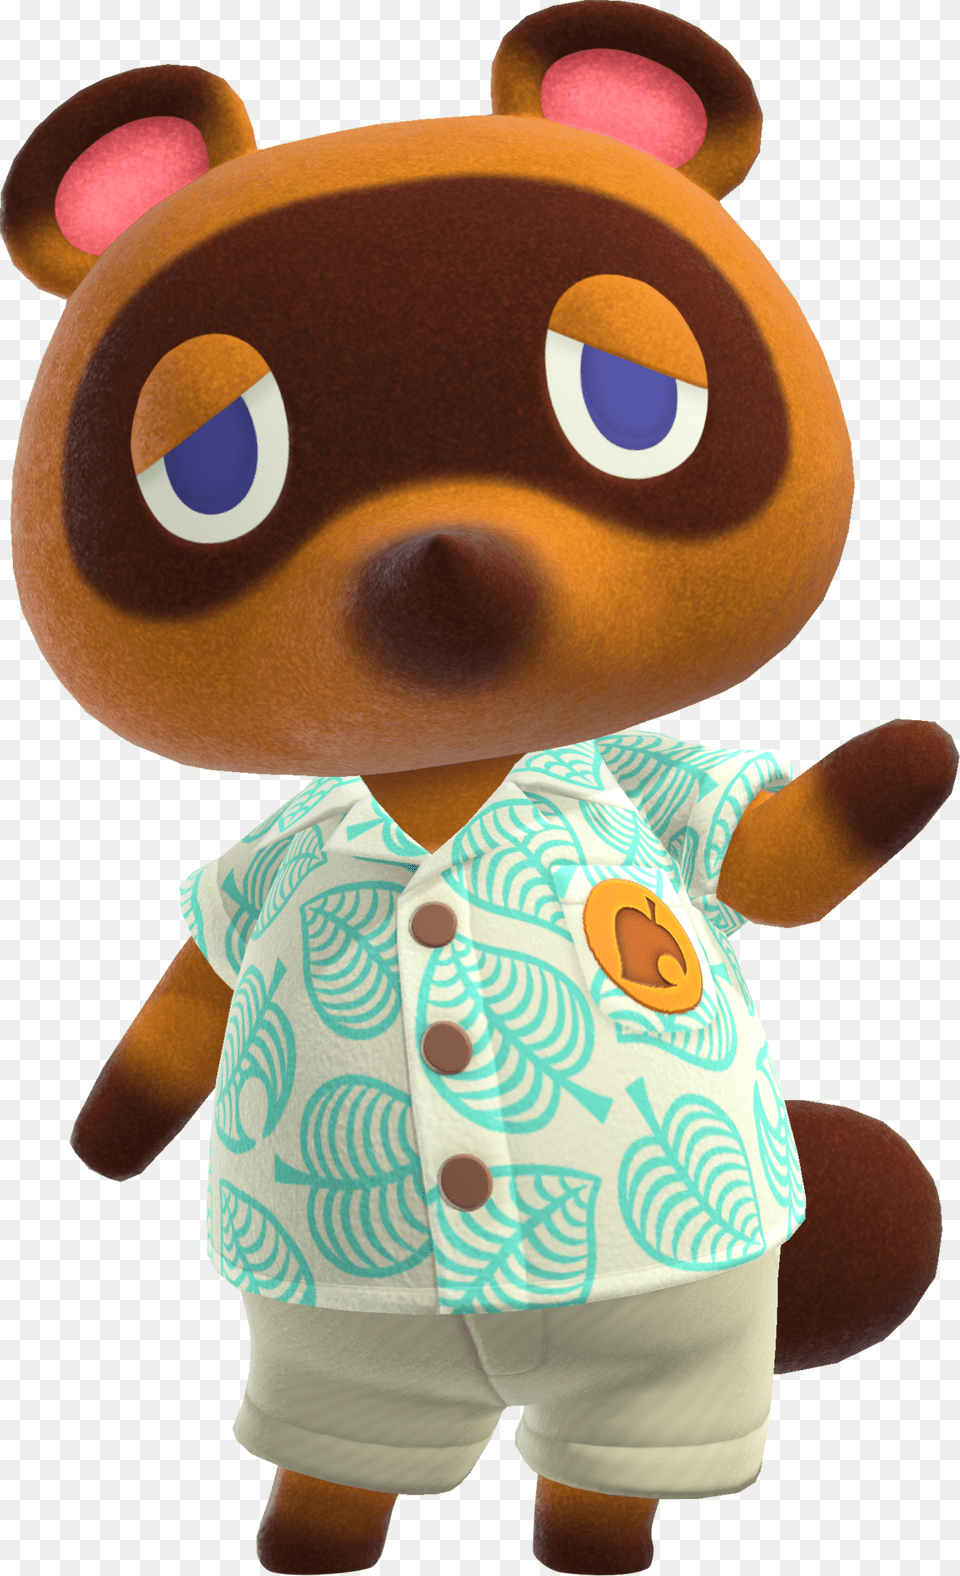 Animal Crossing New Horizons Is A Fashion Paradise Esquire Tom Nook Animal Crossing New Horizon, Plush, Toy, Baby, Person Png